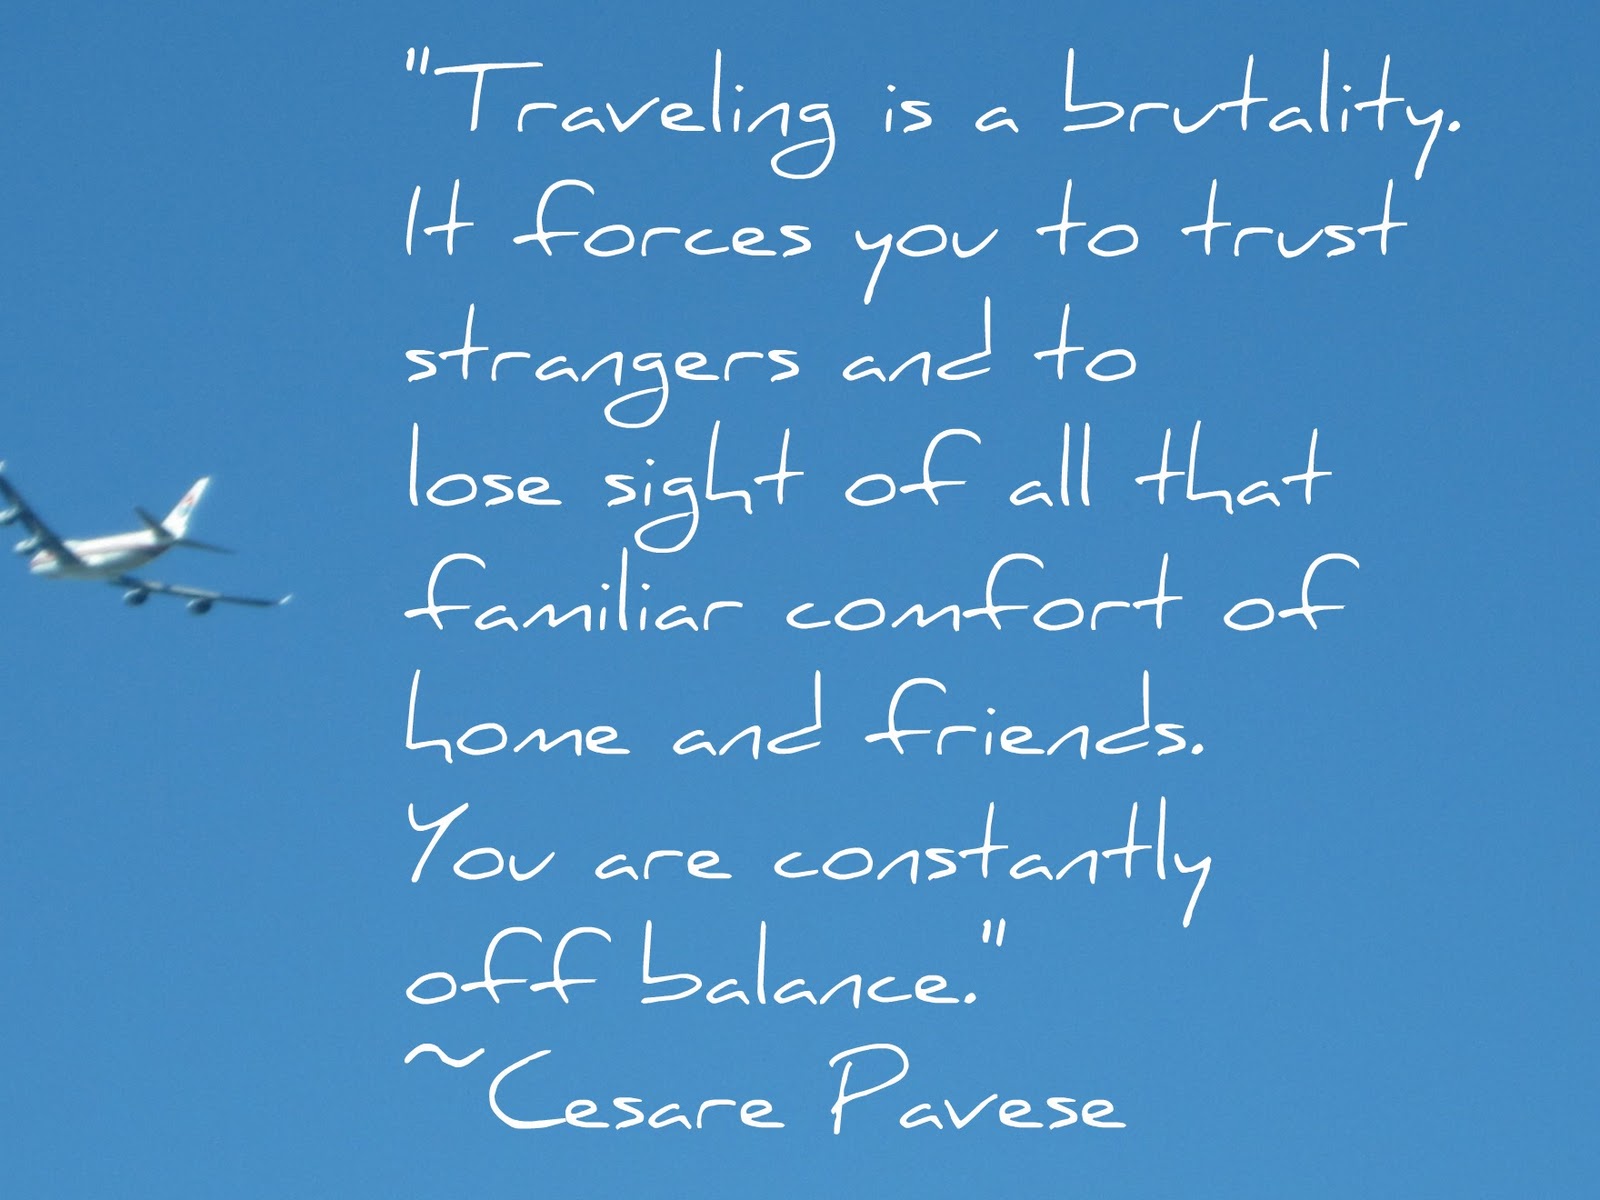 Cesare Pavese's quote #2